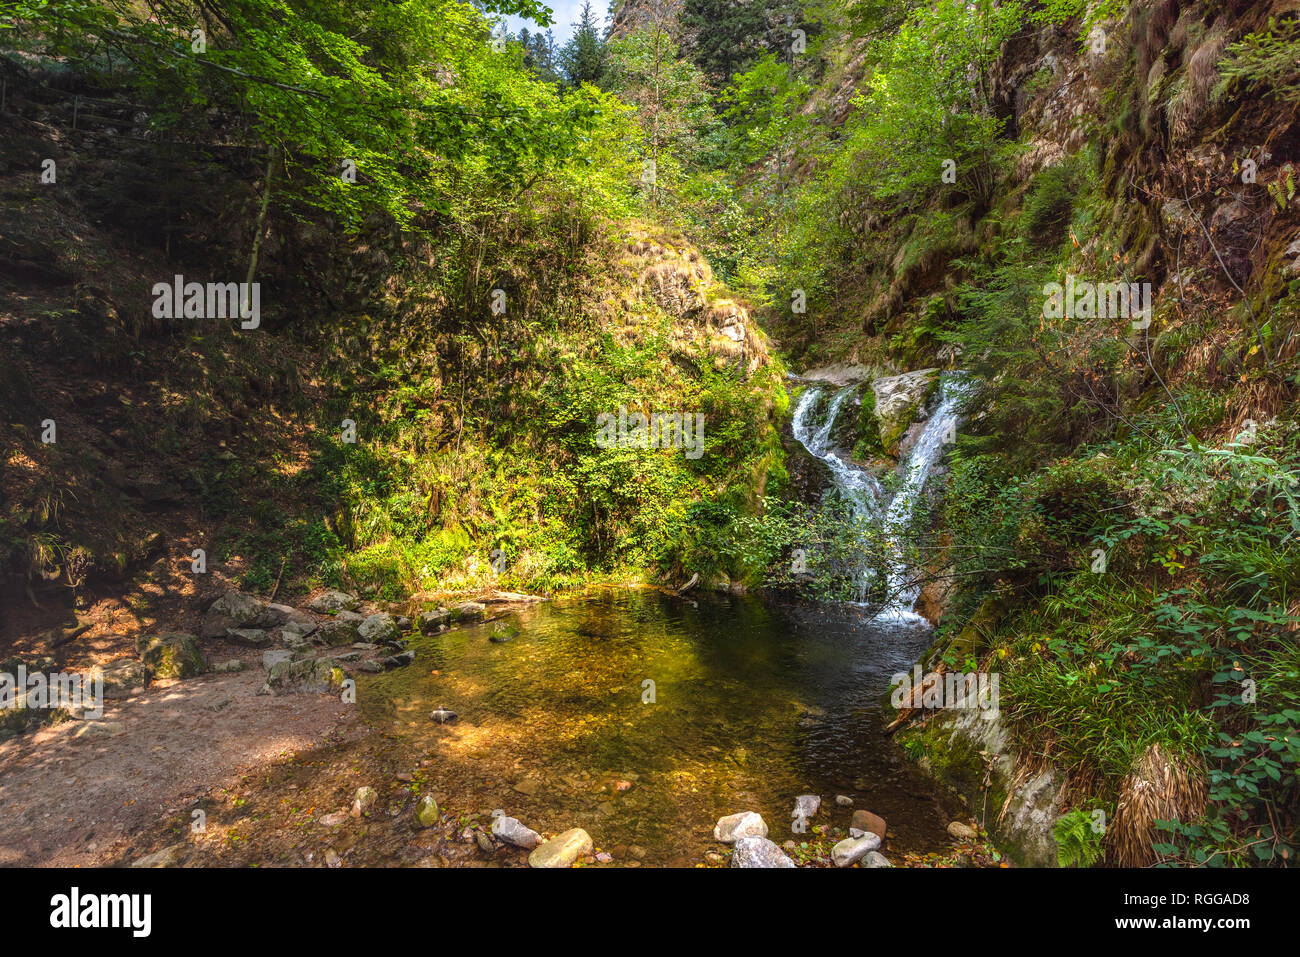 All Saints Waterfalls, town Oppenau, Northern Black Forest, Germany ...